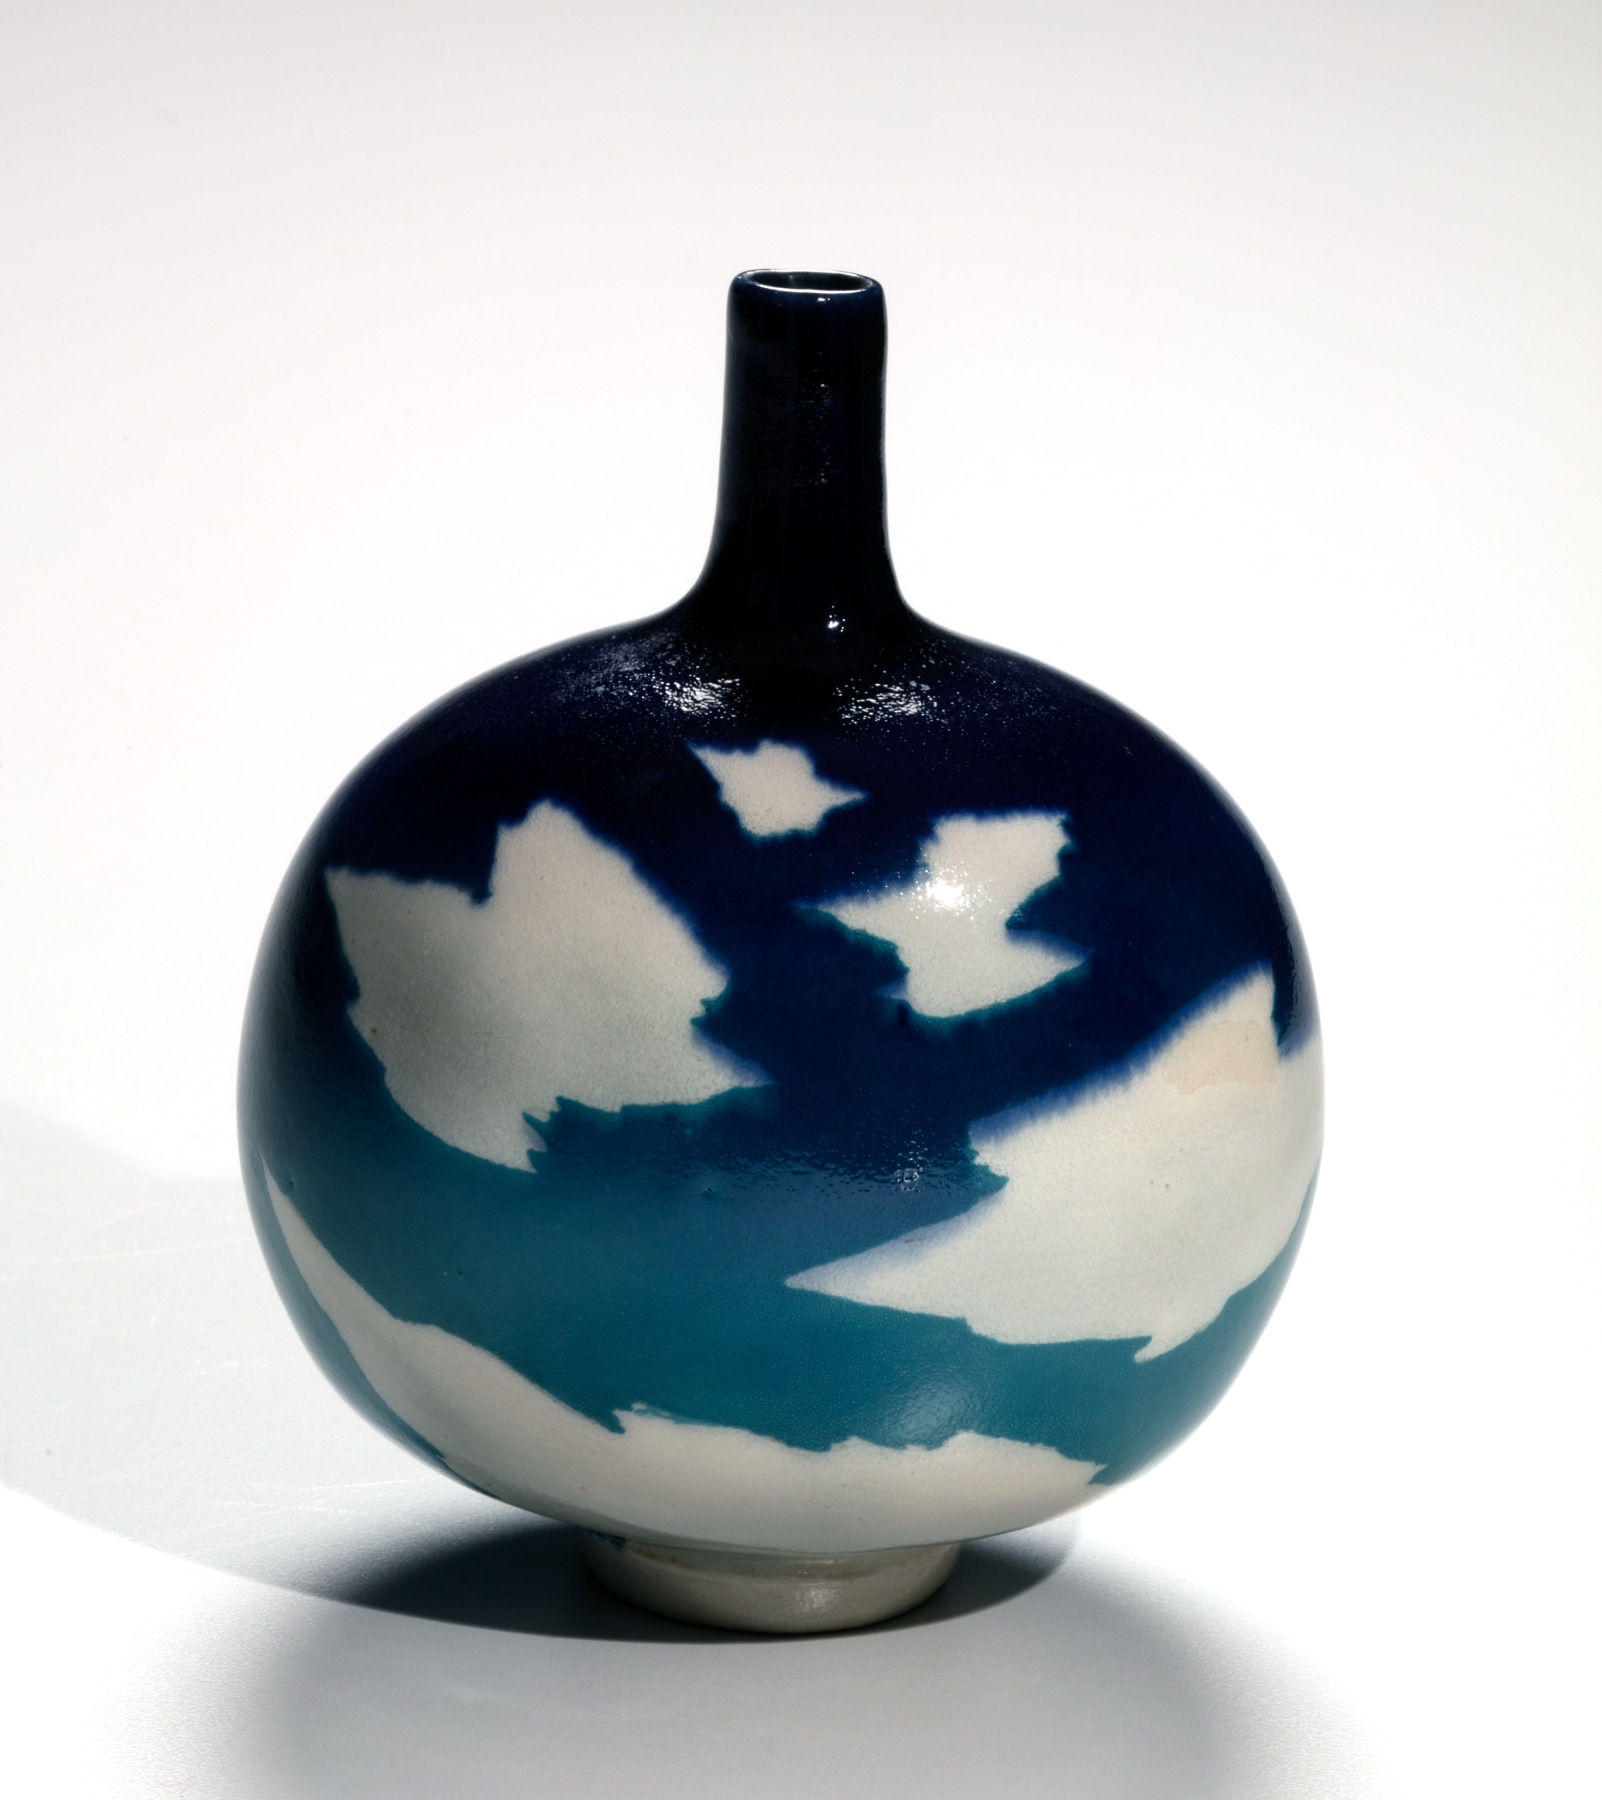 Yanagihara Mutsuo (b. 1934), Small, round vase with thin raised neck and patterned with white clouds against a blue-sky glazing